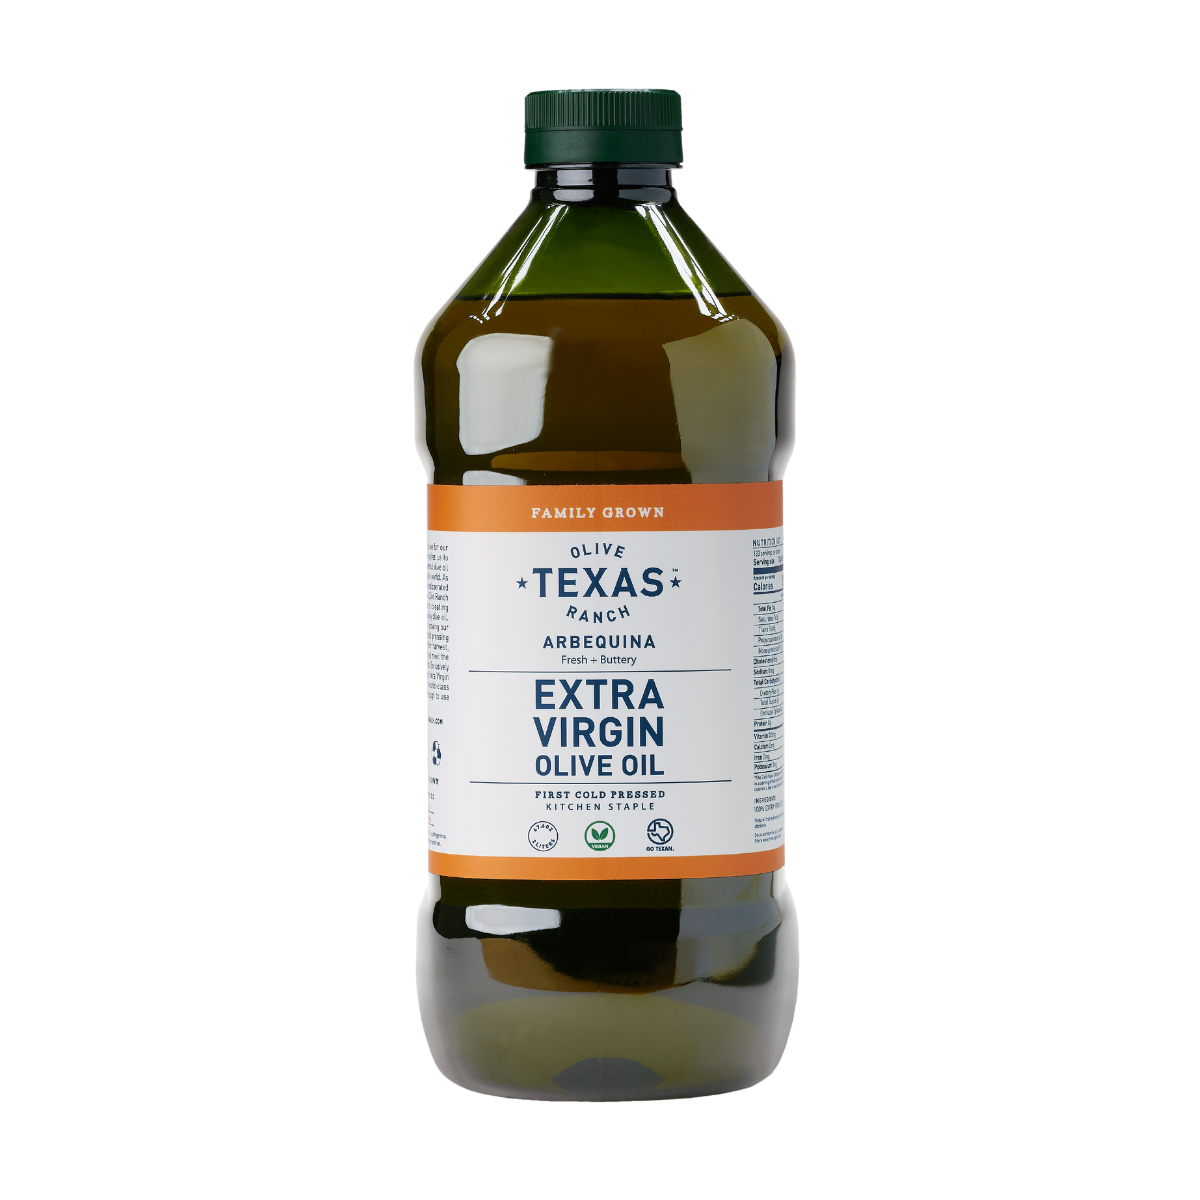 2LKitchenStapleArbequinaOliveOil-TexasOliveRanch.png